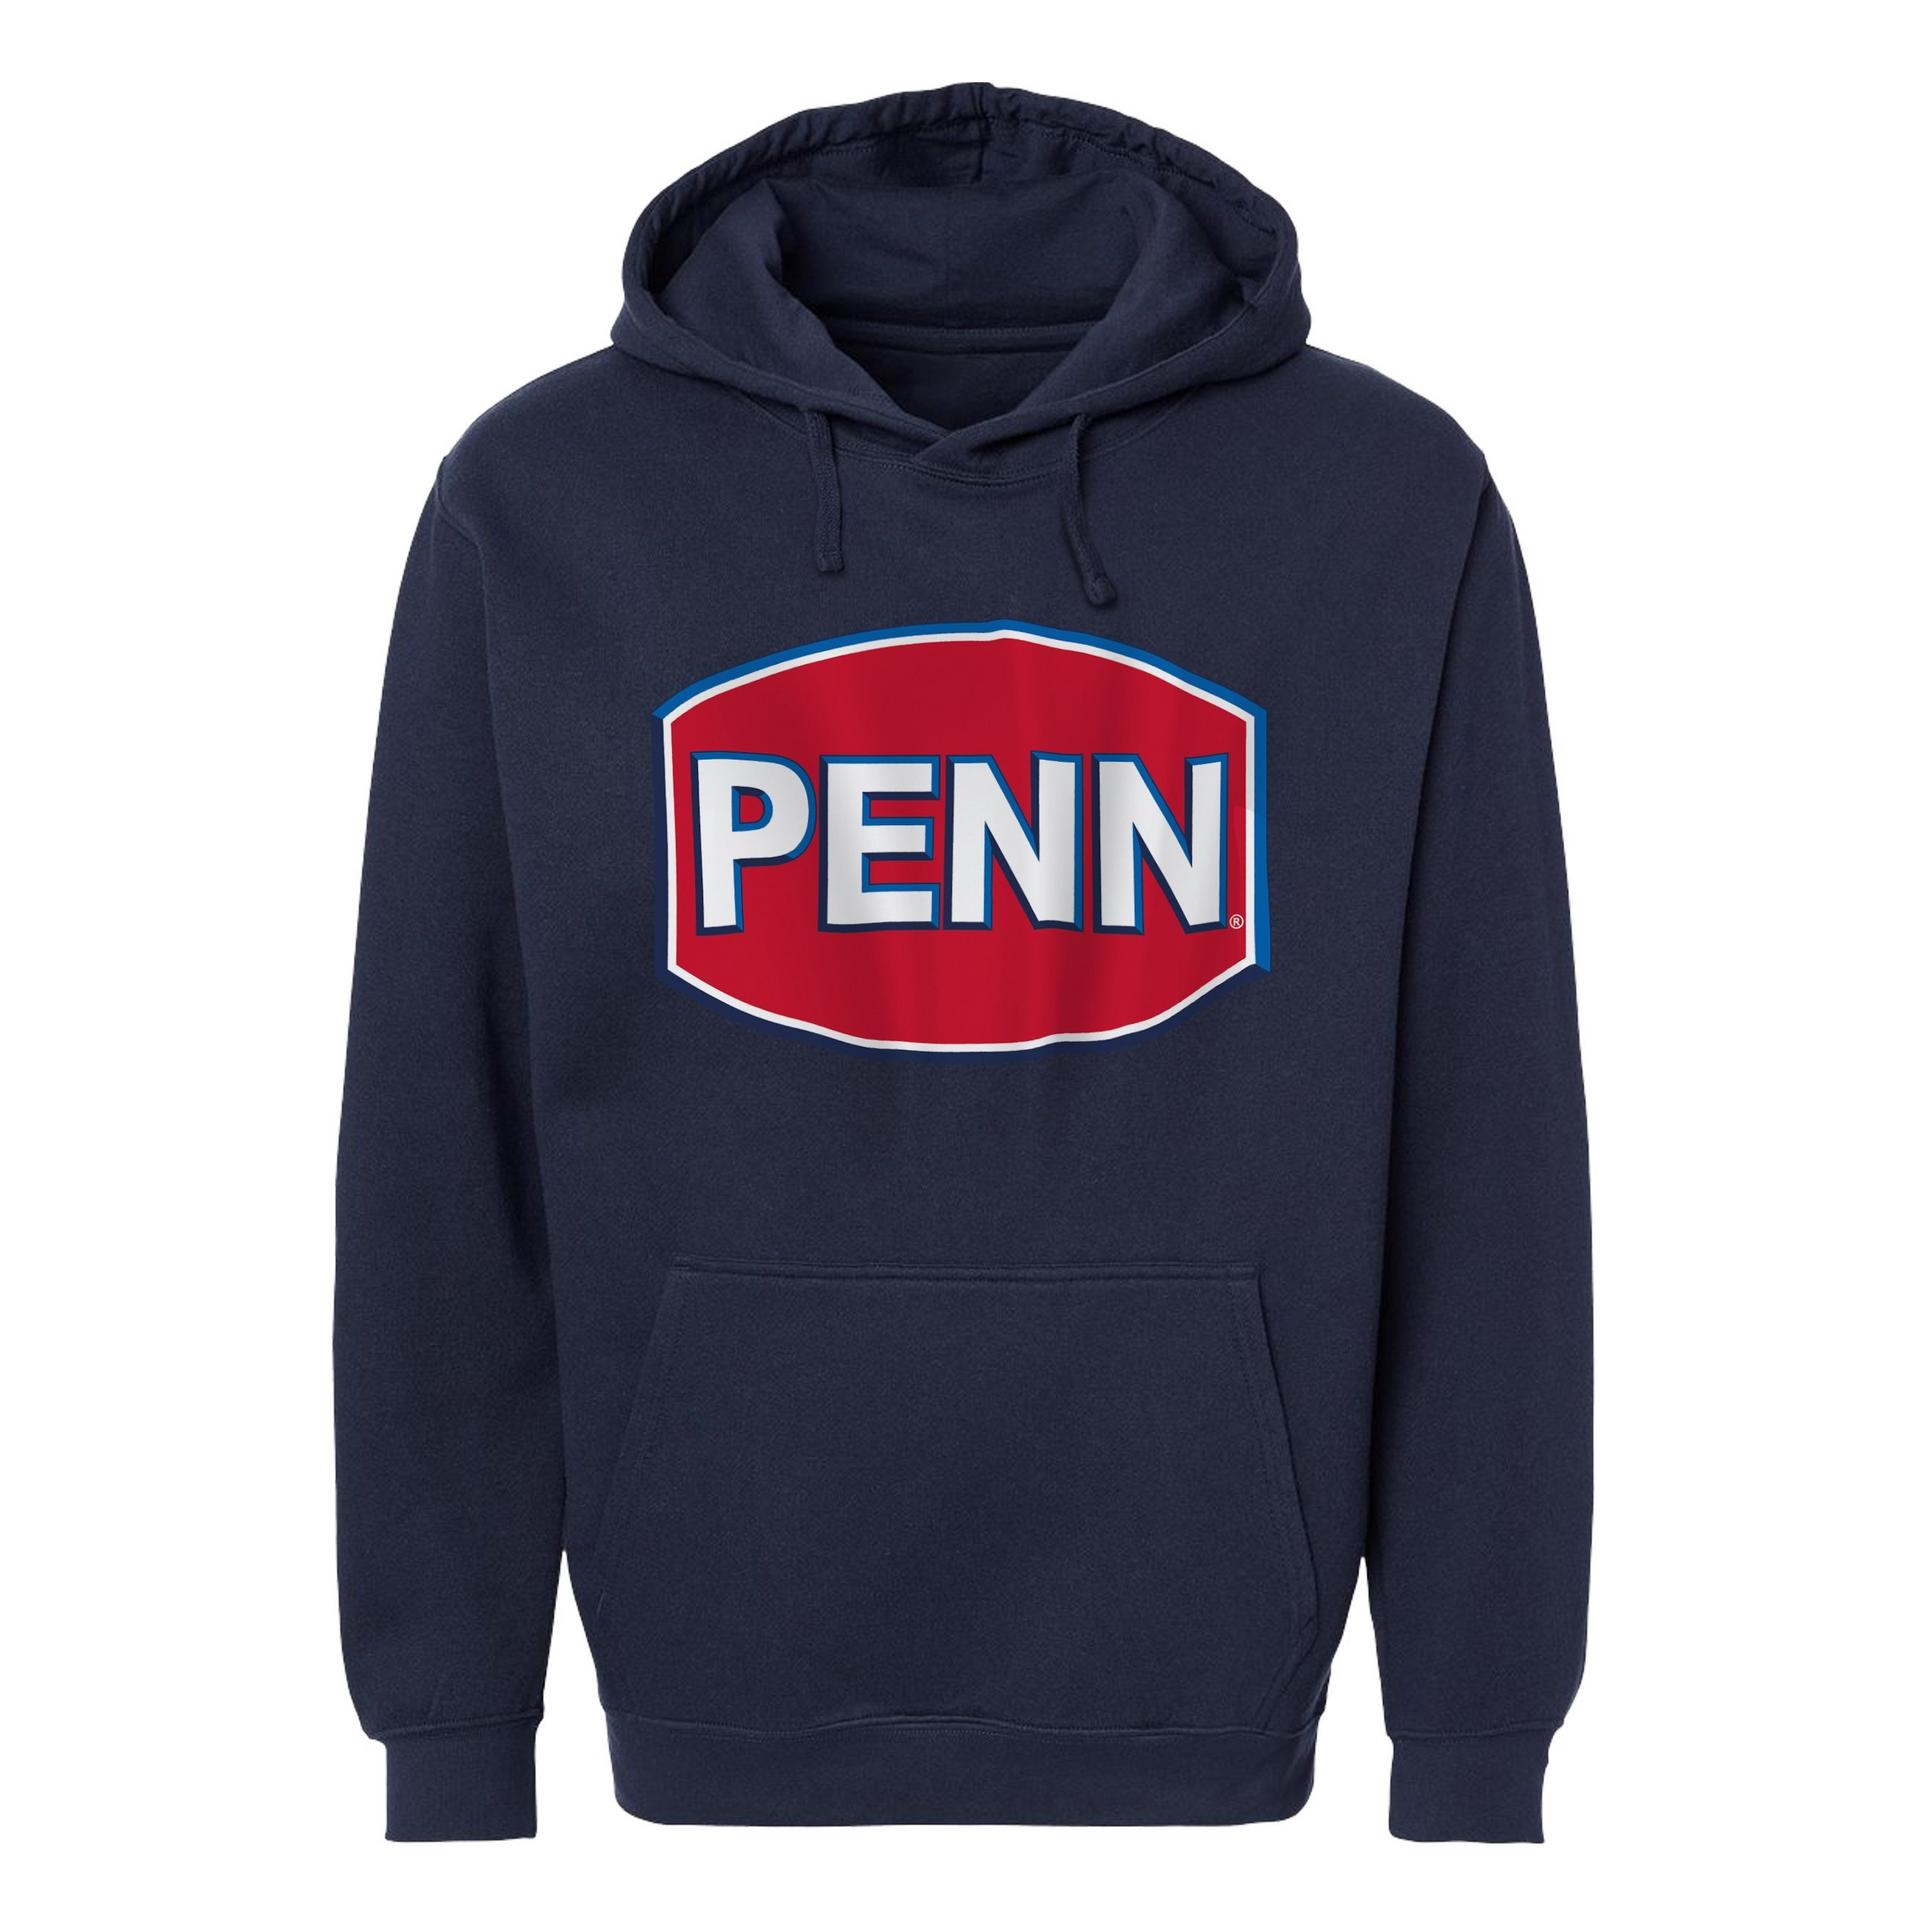 Penn Fishing Clothing, Shoes & Accessories for sale